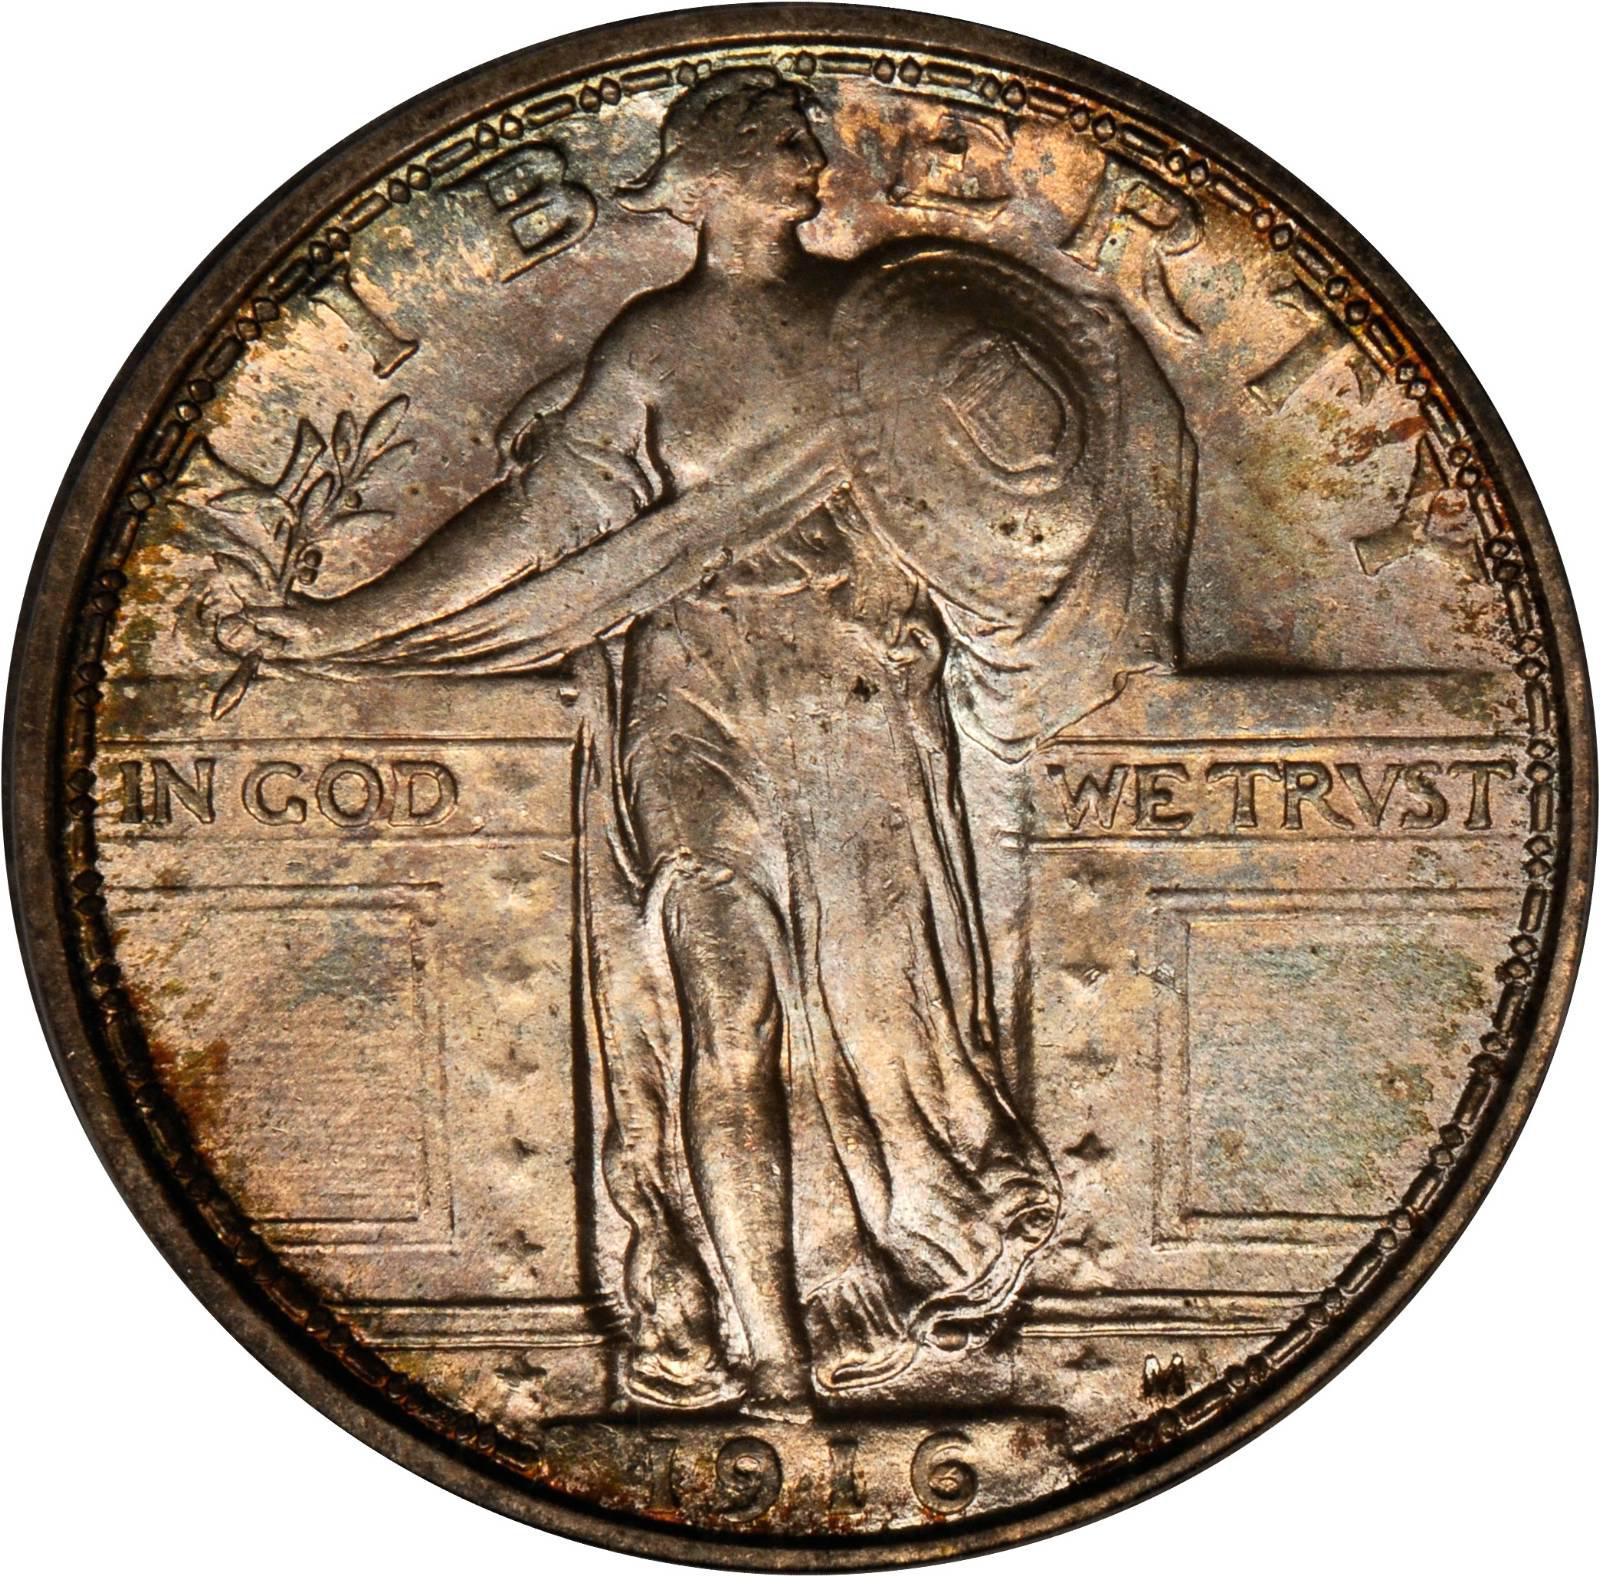 The 1916 Standing Liberty Quarter A Coin To Own Coinappraiser